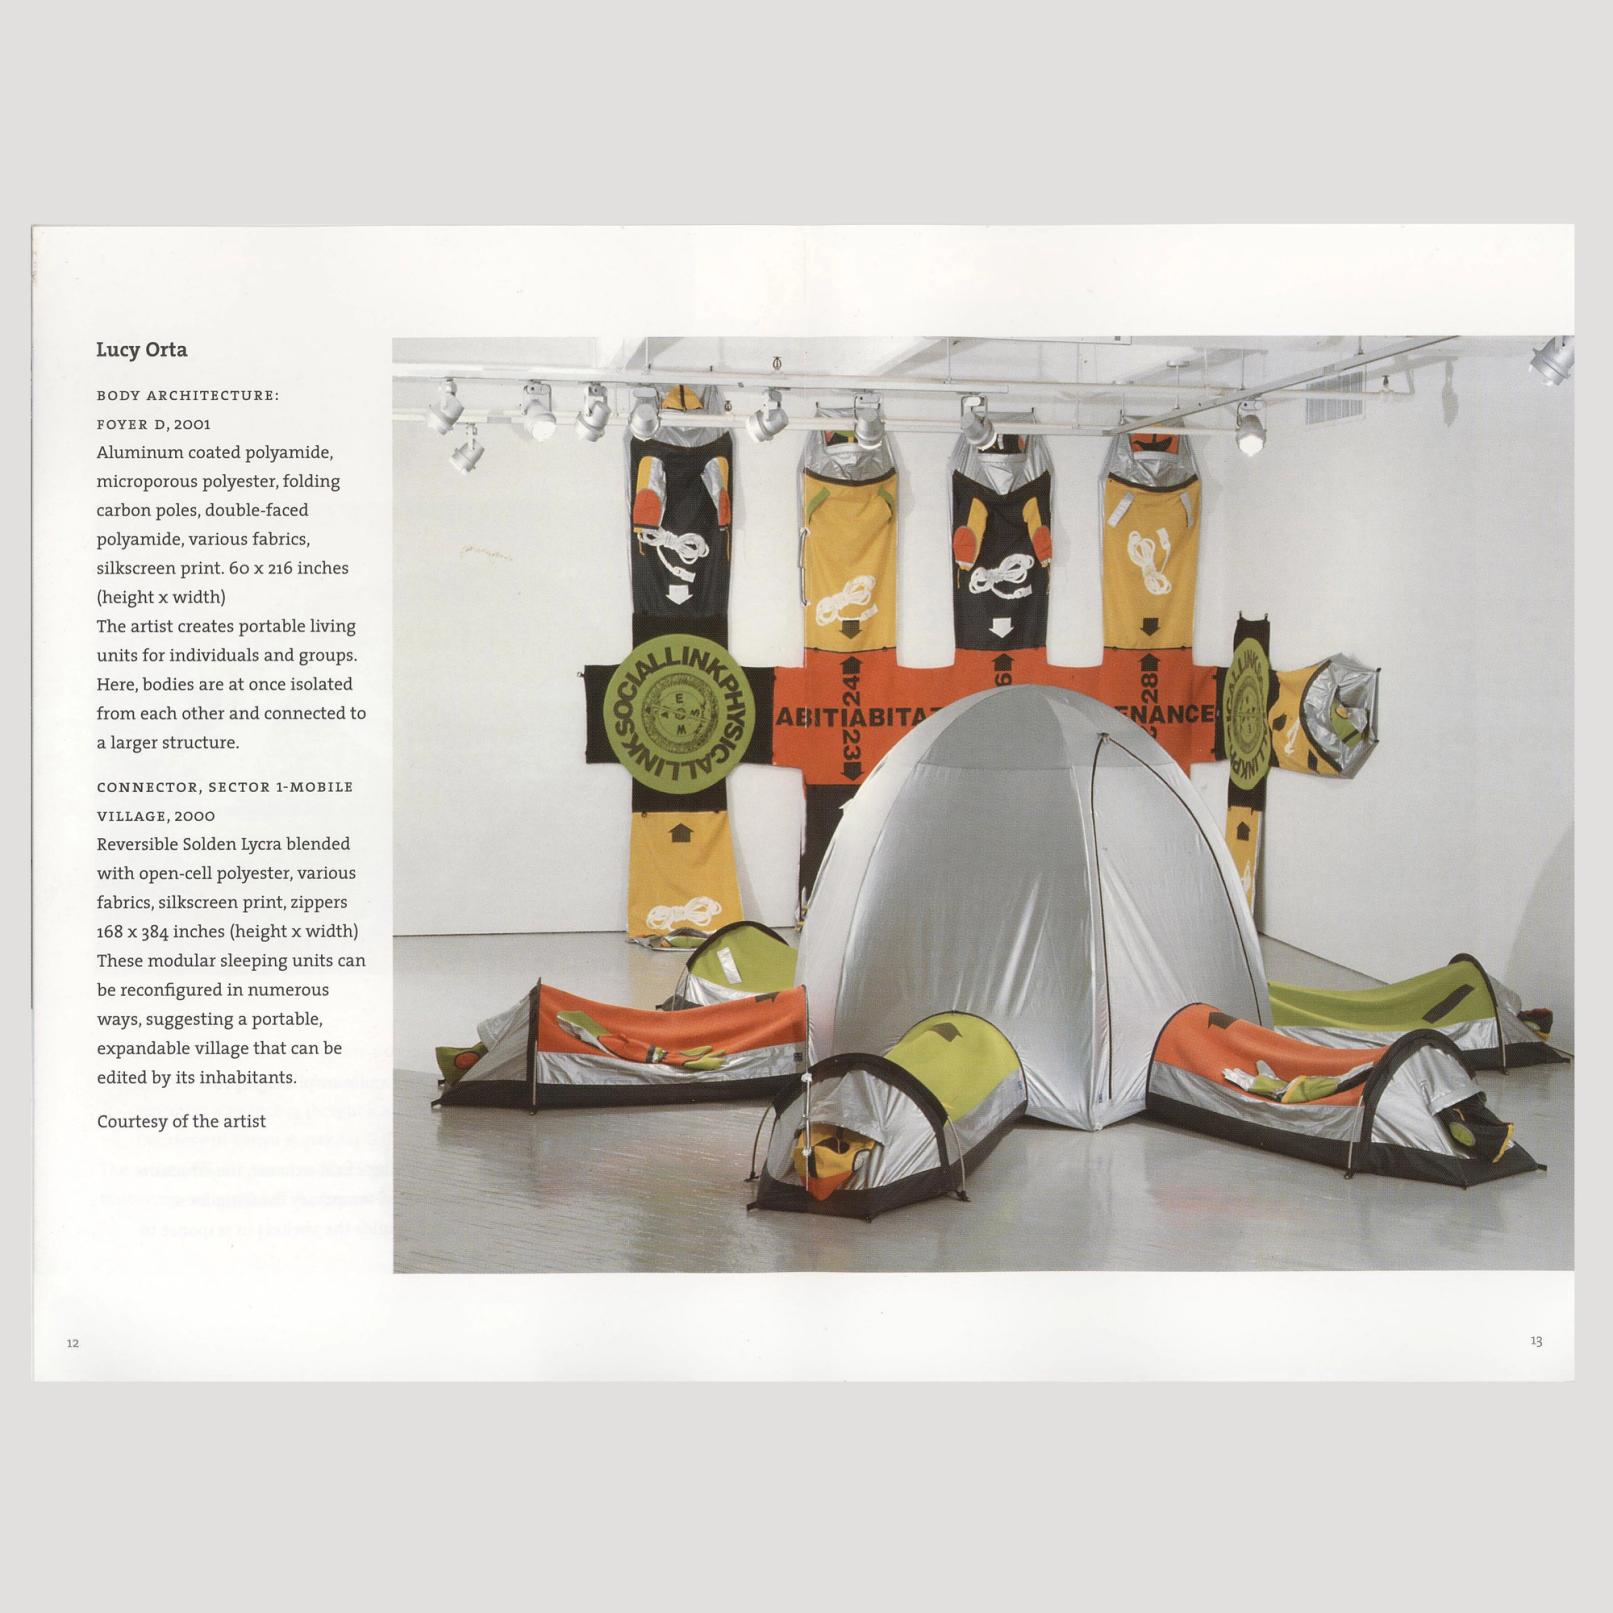 The image is of a book spread with a tall caption on the left and a large image on the right that is positioned over both pages. The image is of a sculpture by Lucy Orta in a gallery. The sculpture is made of fabric and resembles a 7-sided tent. The tent part is tall and silver. Coming out of each side of the tent at the floor are long tubes meant for individual people to lay in. They are silver and have colored tops that alternate between green and orange. Behind the tent hanging on the wall is a large fabric sculpture that spans from the floor to the ceiling in the shape of a 4-pronged picket fence. The caption on the left reads: "Lucy Orta BODY ARCHITECTURE: FOYER D, 2001 Aluminum coated polyamide, microporous polyester, folding carbon poles, double-faced polyamide, various fabrics, silkscreen print. 60 x 216 inches (height x width) The artist creates portable living units for individuals and groups. Here, bodies are at once isolated from each other and connected to a larger structure. CONNECTOR, SECTOR 1-MOBILE VILLAGE, 2000 Reversible Solden Lycra blended with open-cell polyester, various fabrics, silkscreen print, zippers 168 x 384 inches (height x width) These modular sleeping units can be reconfigured in numerous ways, suggesting a portable, expandable village that can be edited by its inhabitants. Courtesy of the artist"